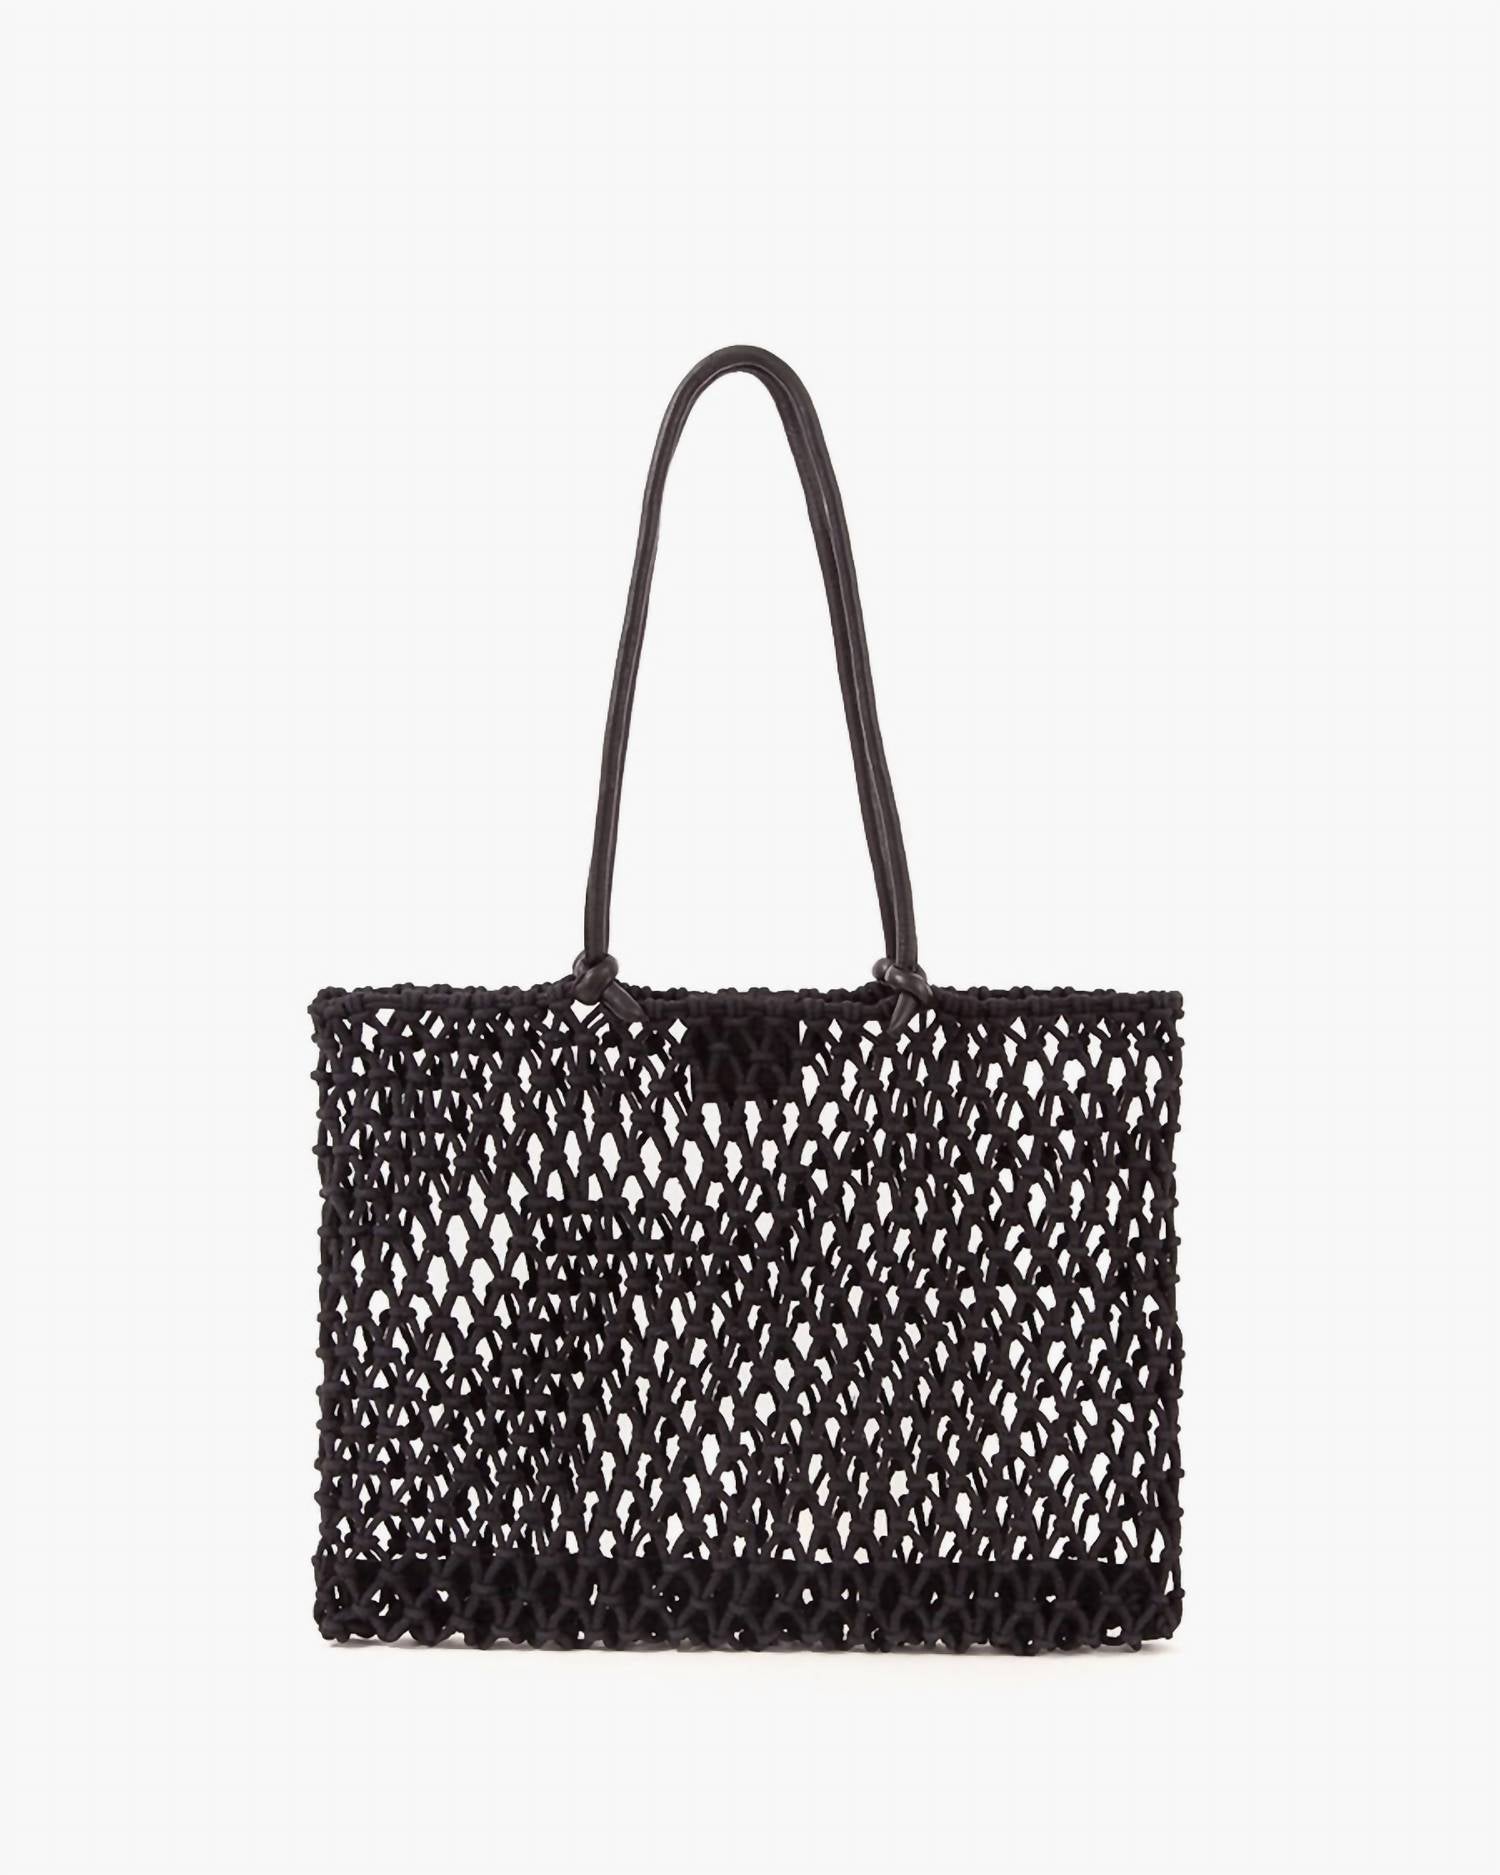 New Clare V. Sandy Shopper Woven Net Weave Construction w/ Leather